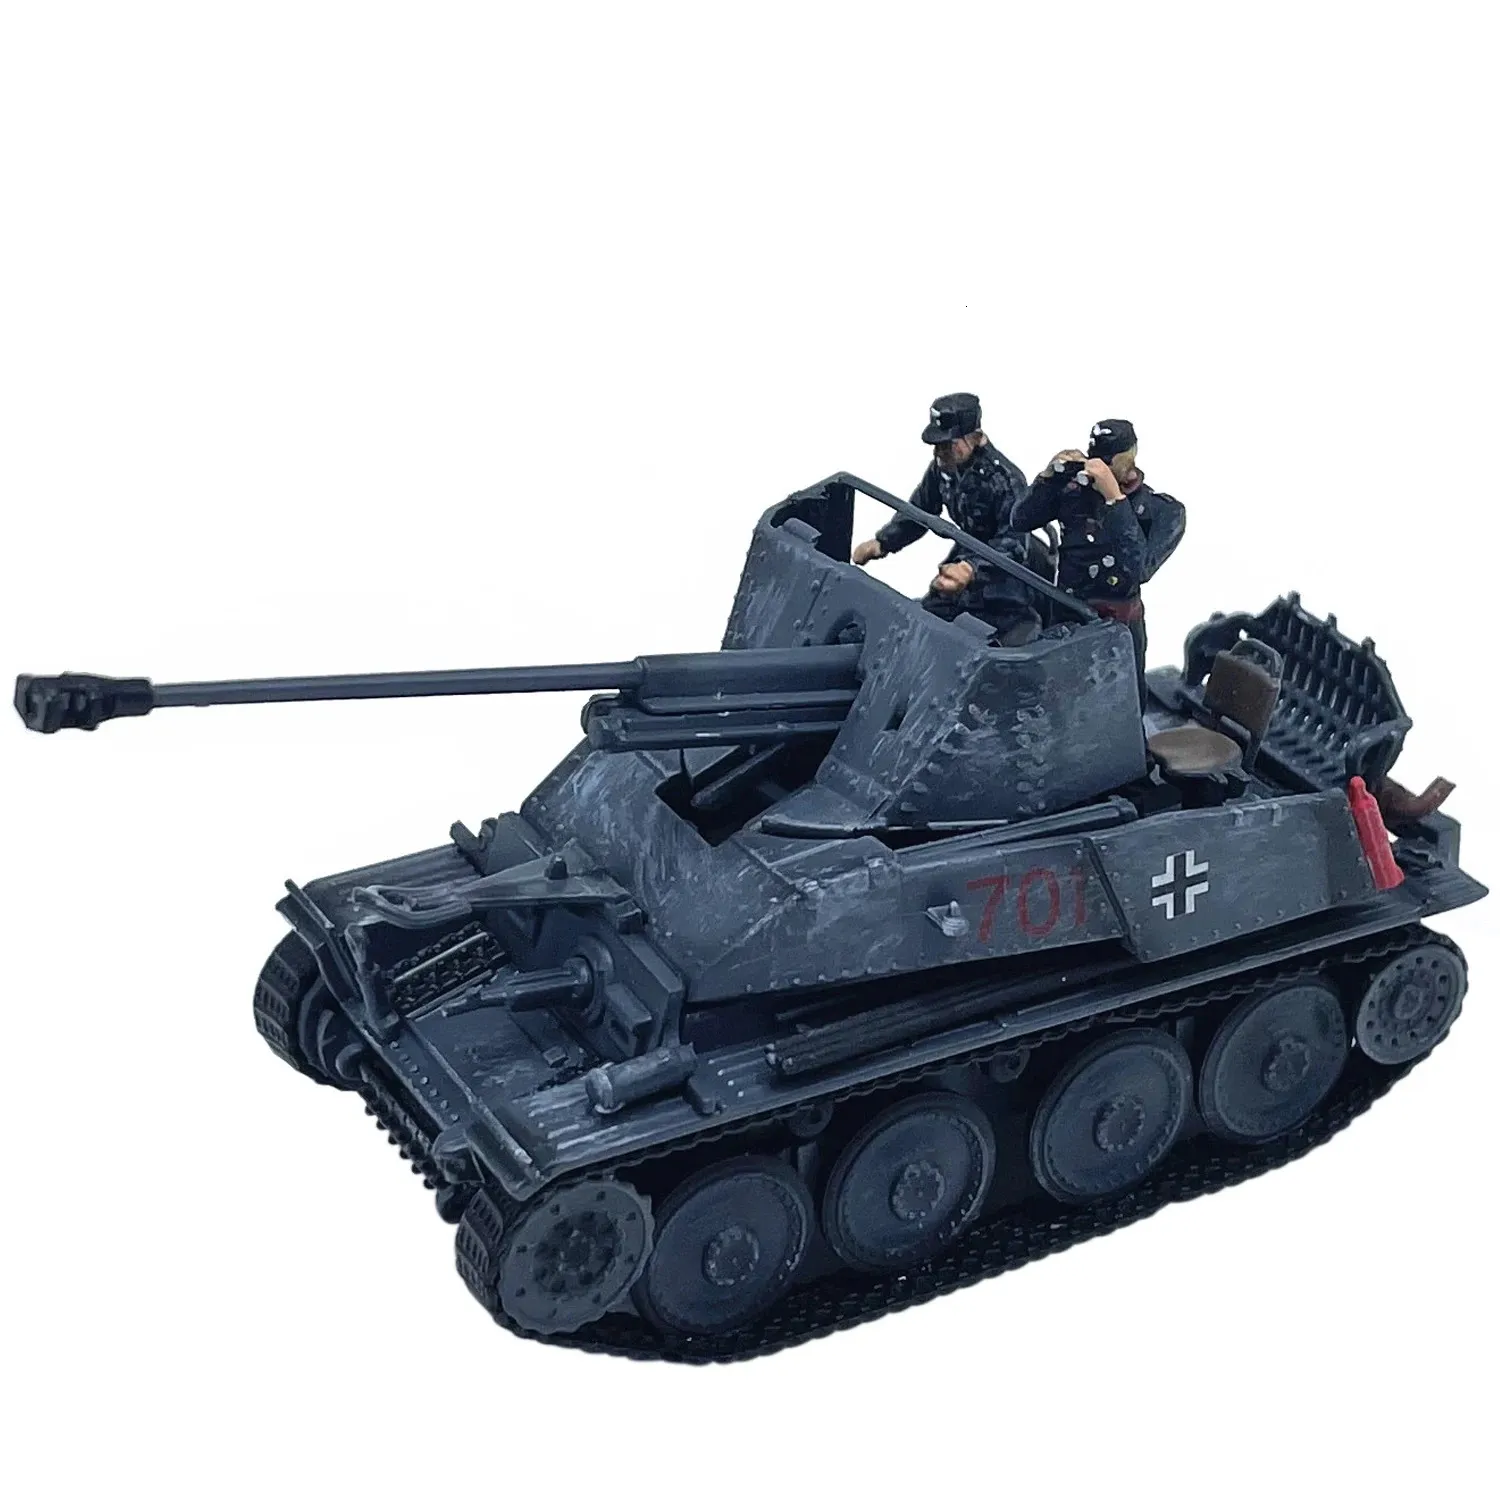 Diecast Model Diecast German Weasel Anti-tank Artillery Fighting Vehicle Alloy Plastic Model 1 72 Scale Toy Gift Collection Simulation 231208